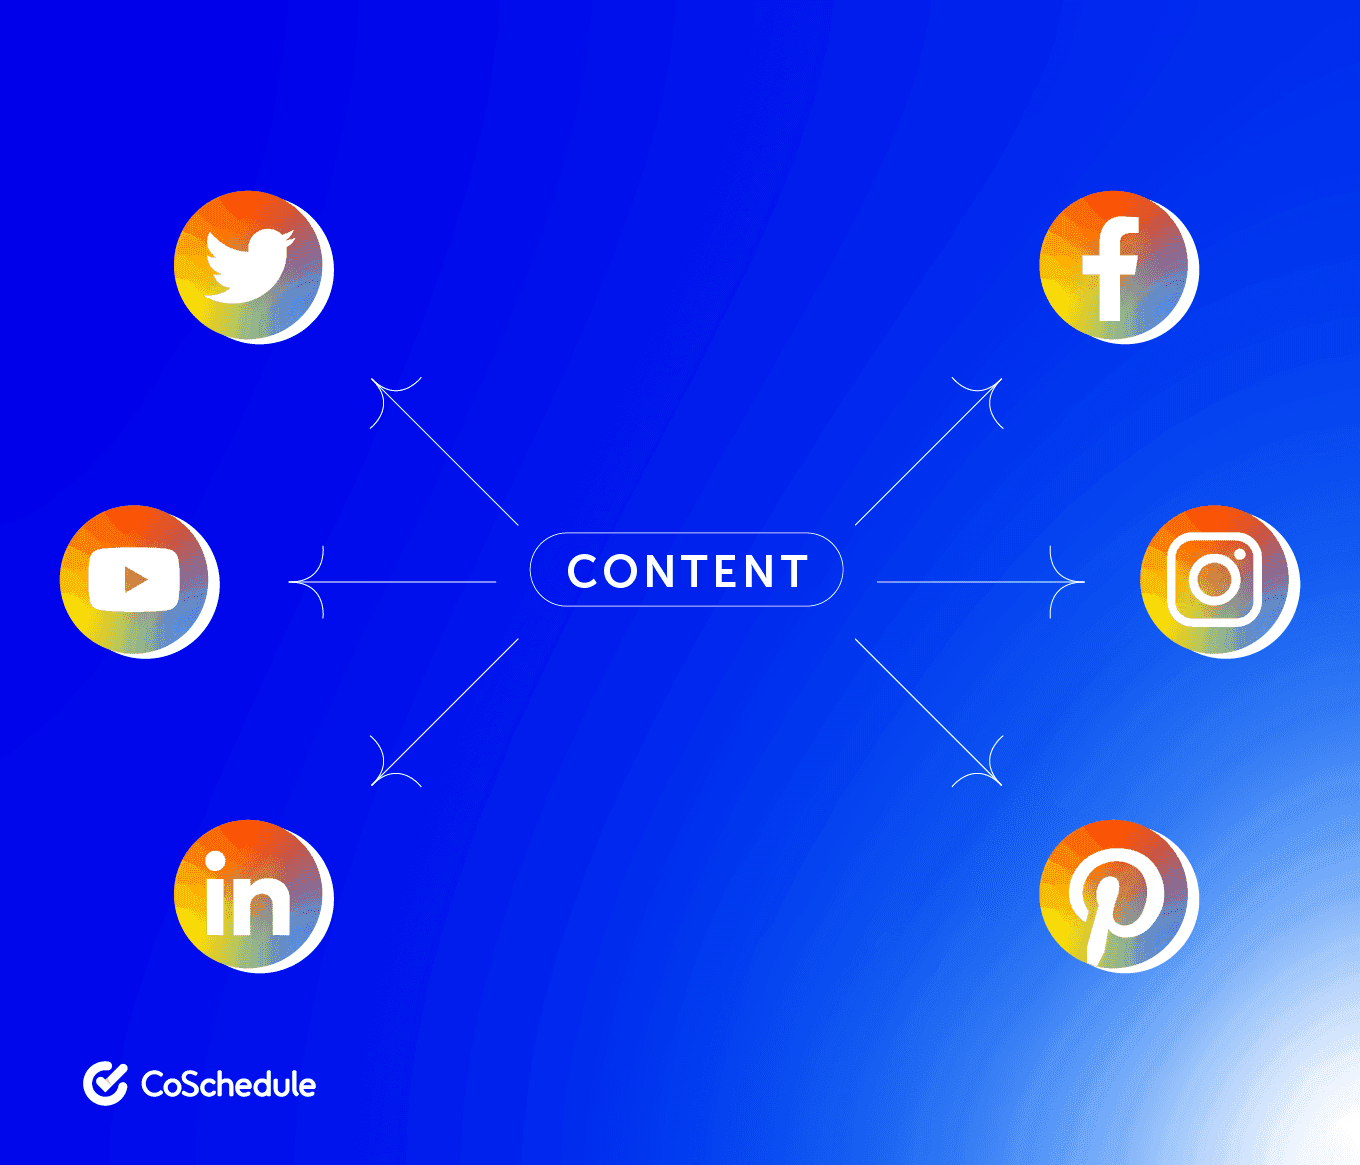 Colorful web with the word 'content' in the middle with arrows pointing to 6 social media platforms such as twitter, youtube, linkedin, facebook, instagram, and pinterest.